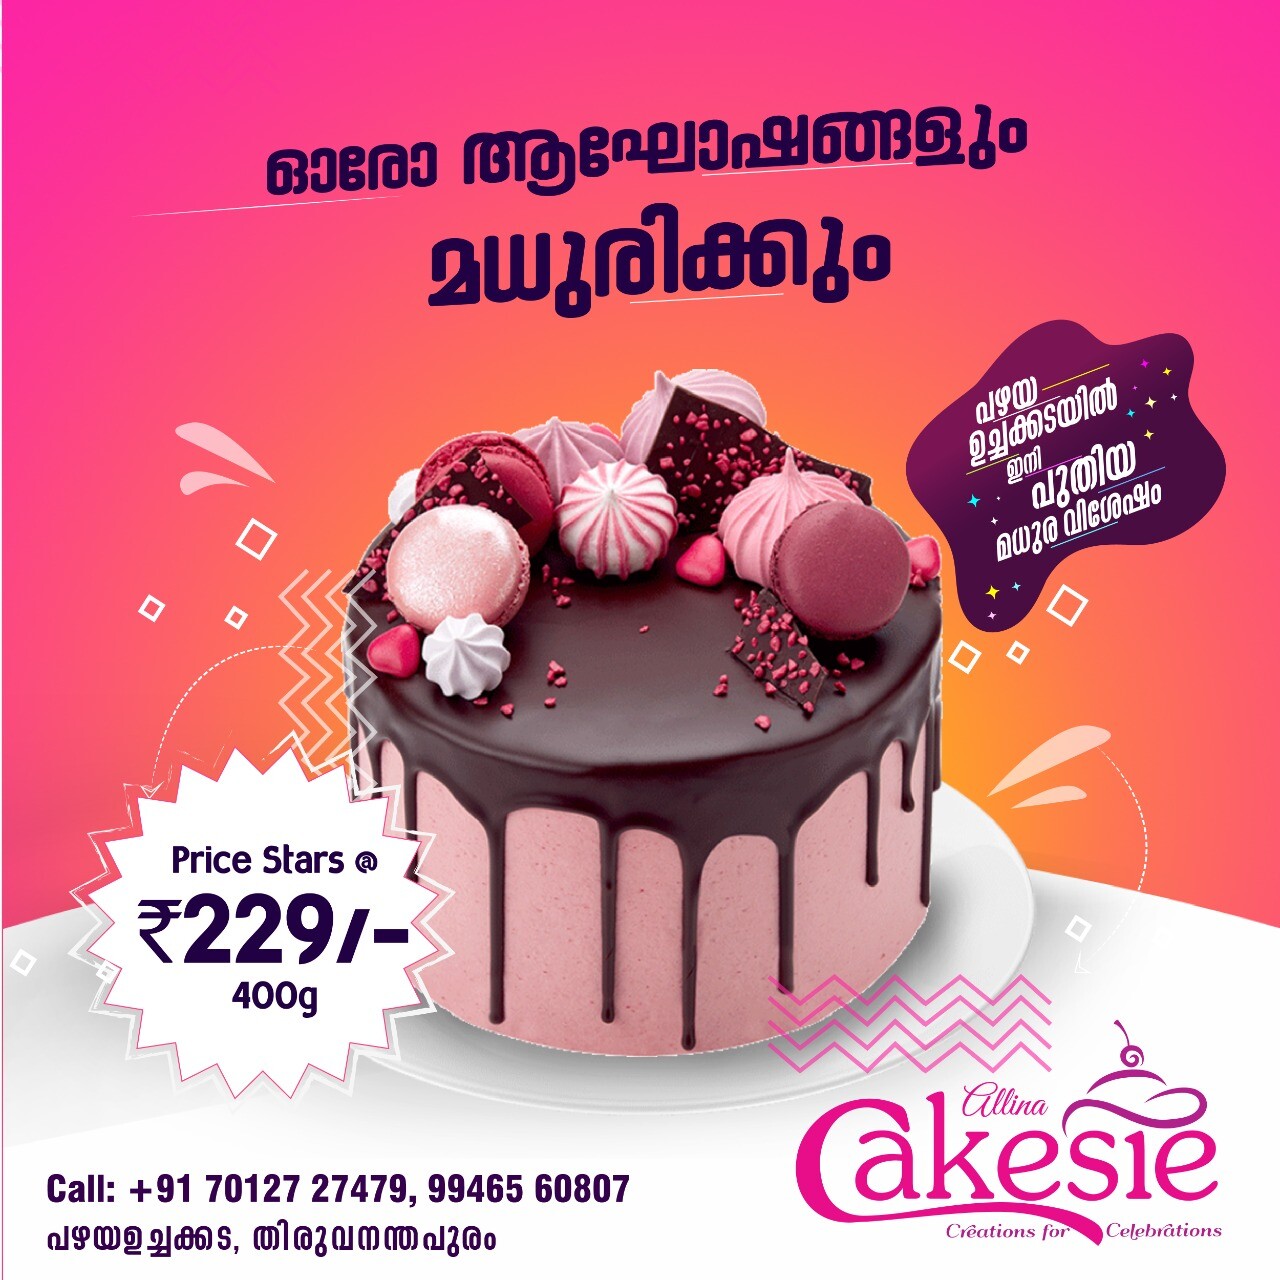 Easy black forest cake recipe in malayalam - gilitwave